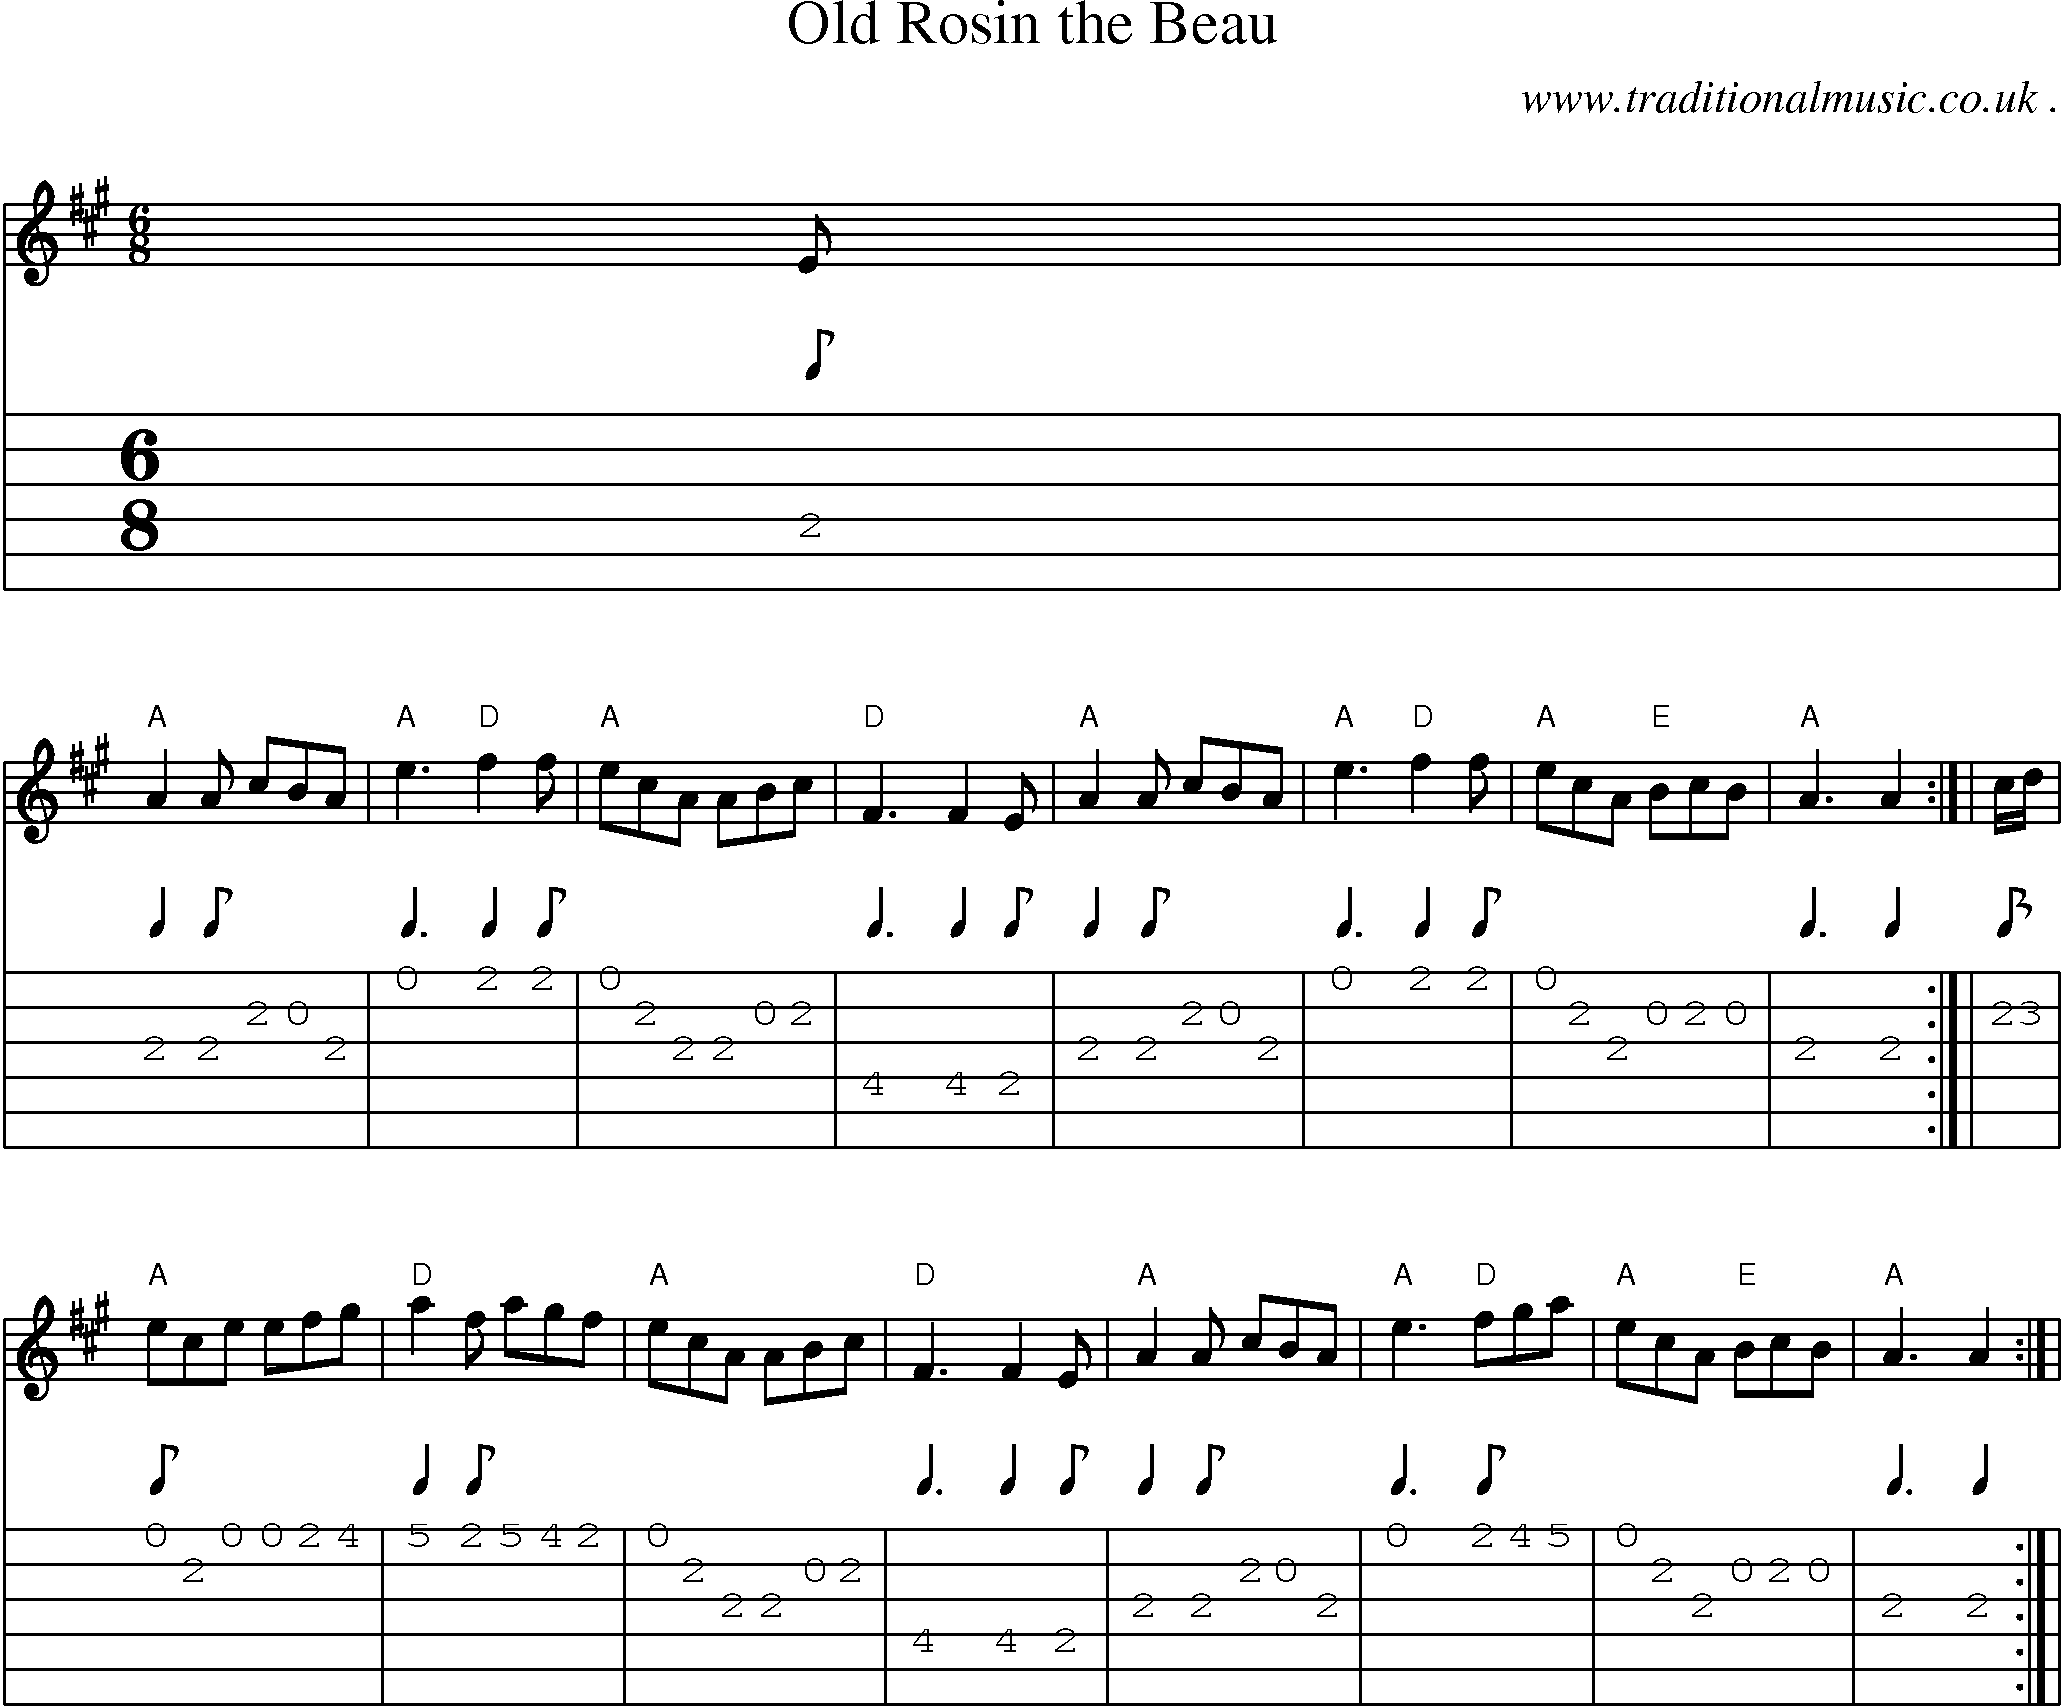 Sheet-music  score, Chords and Guitar Tabs for Old Rosin The Beau